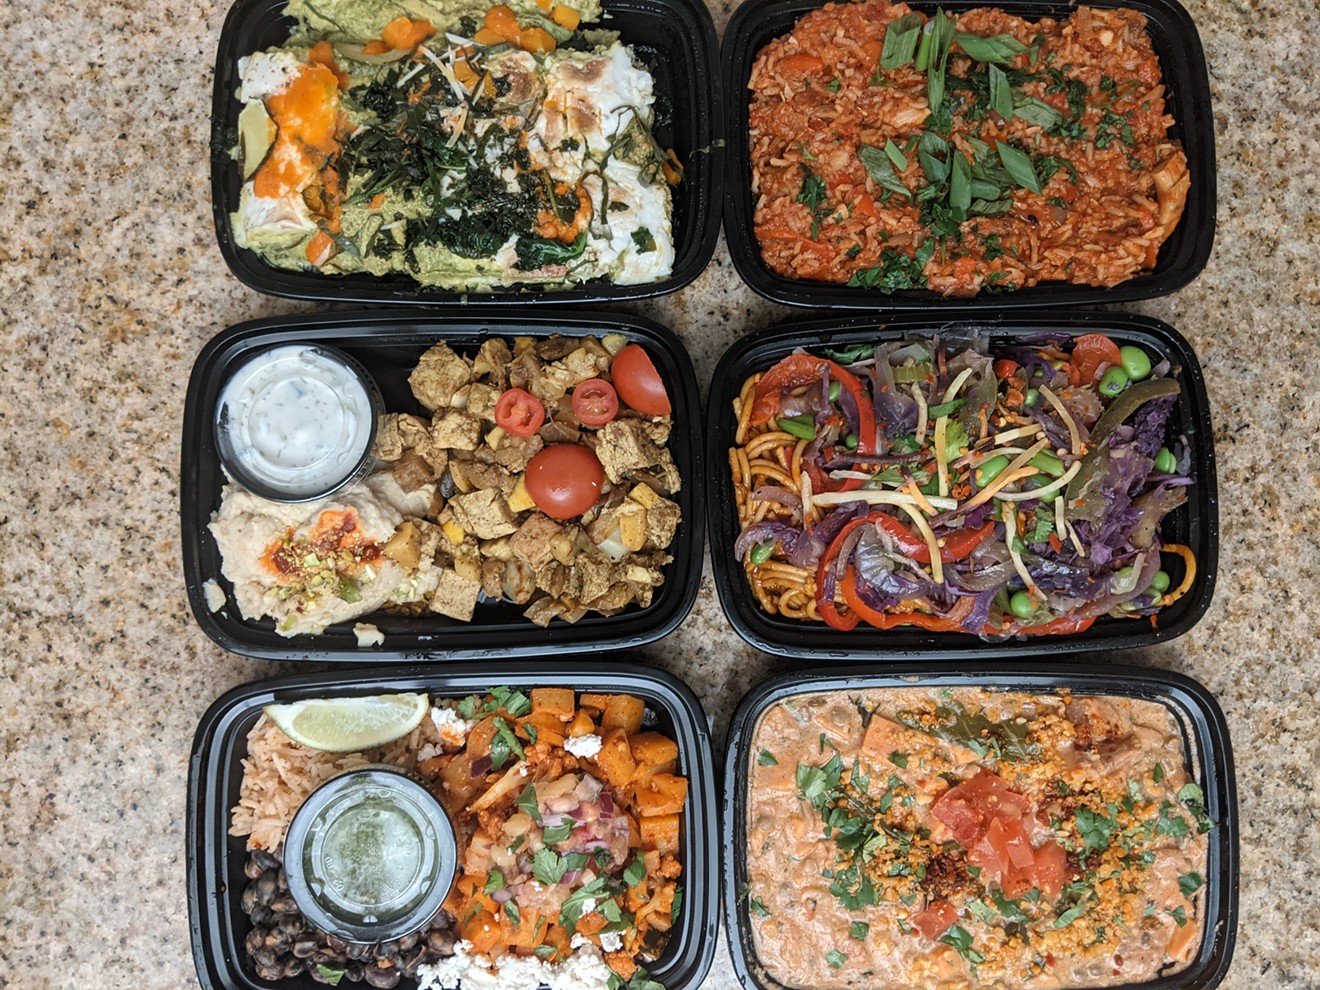 An example of a Monday delivery from The Vegan Taste.